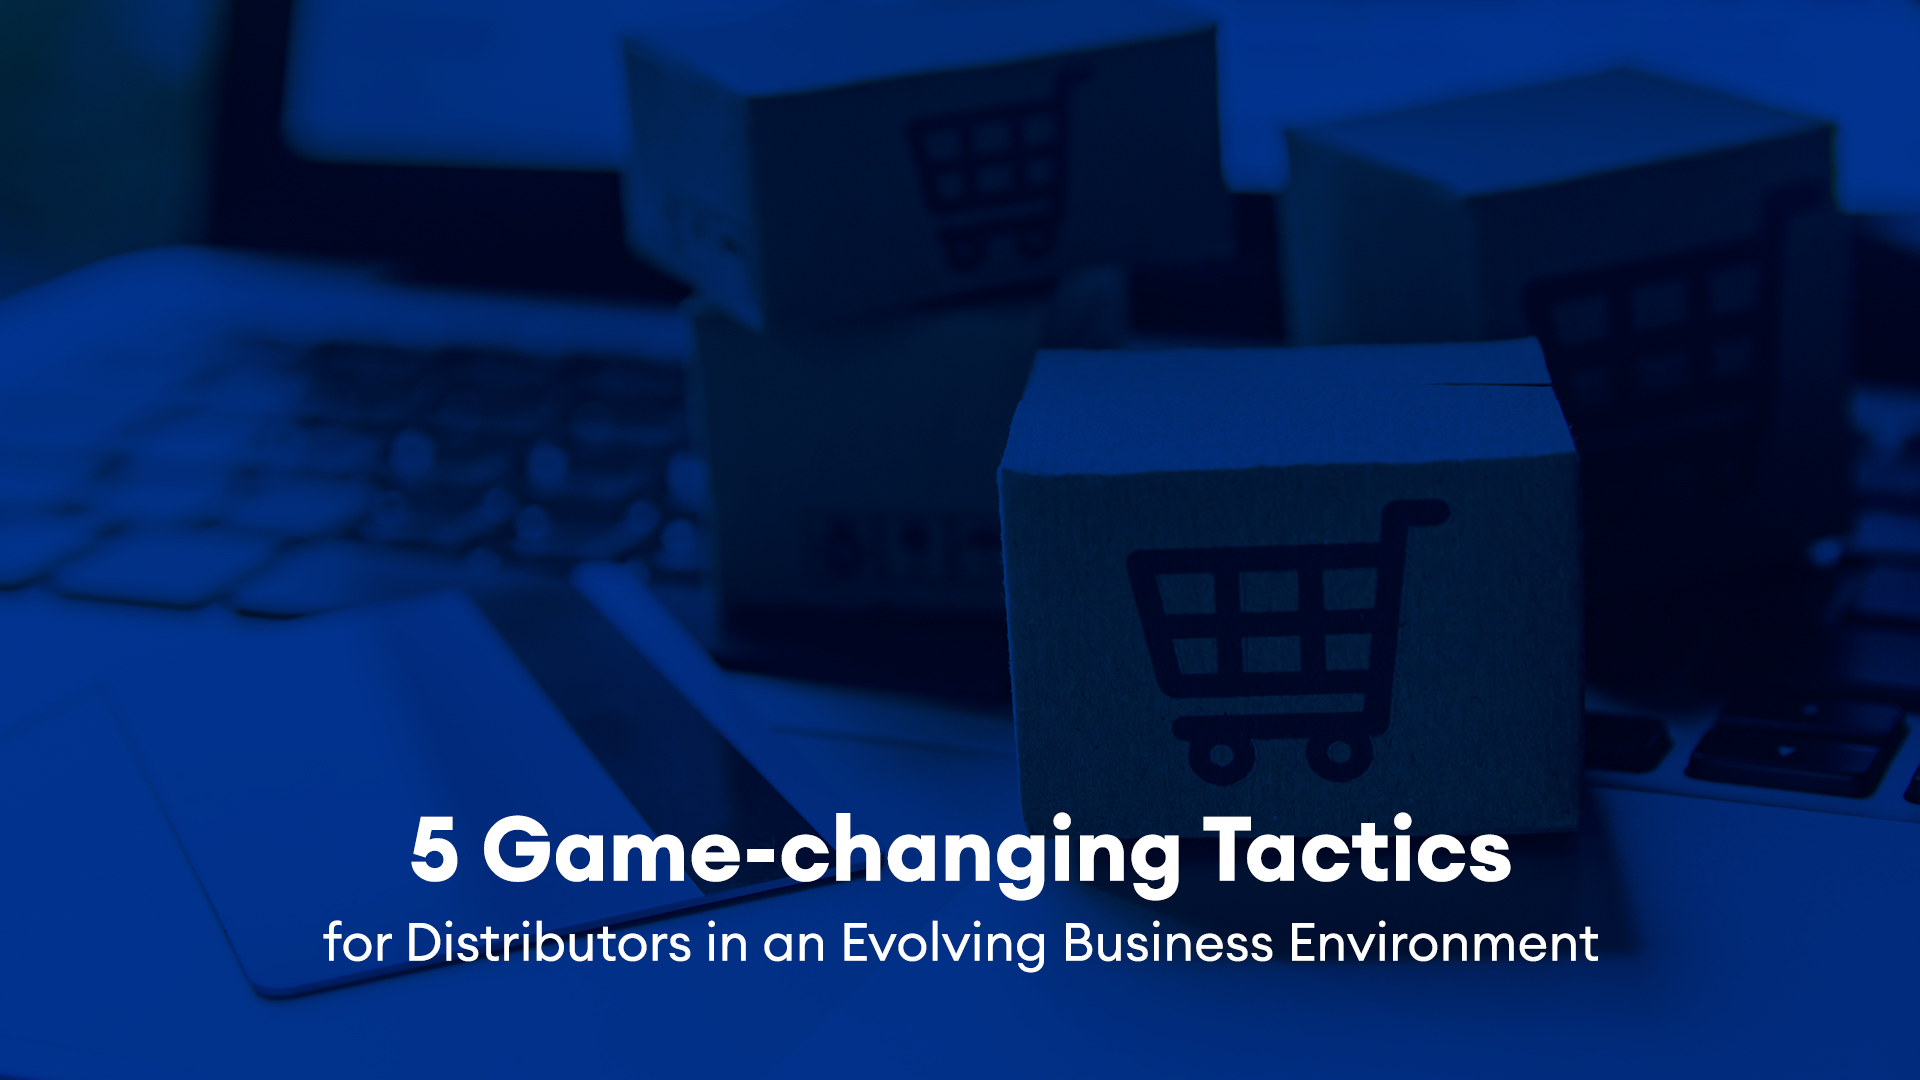 5 Game-changing Tactics for Distributors in an Evolving Business Environment